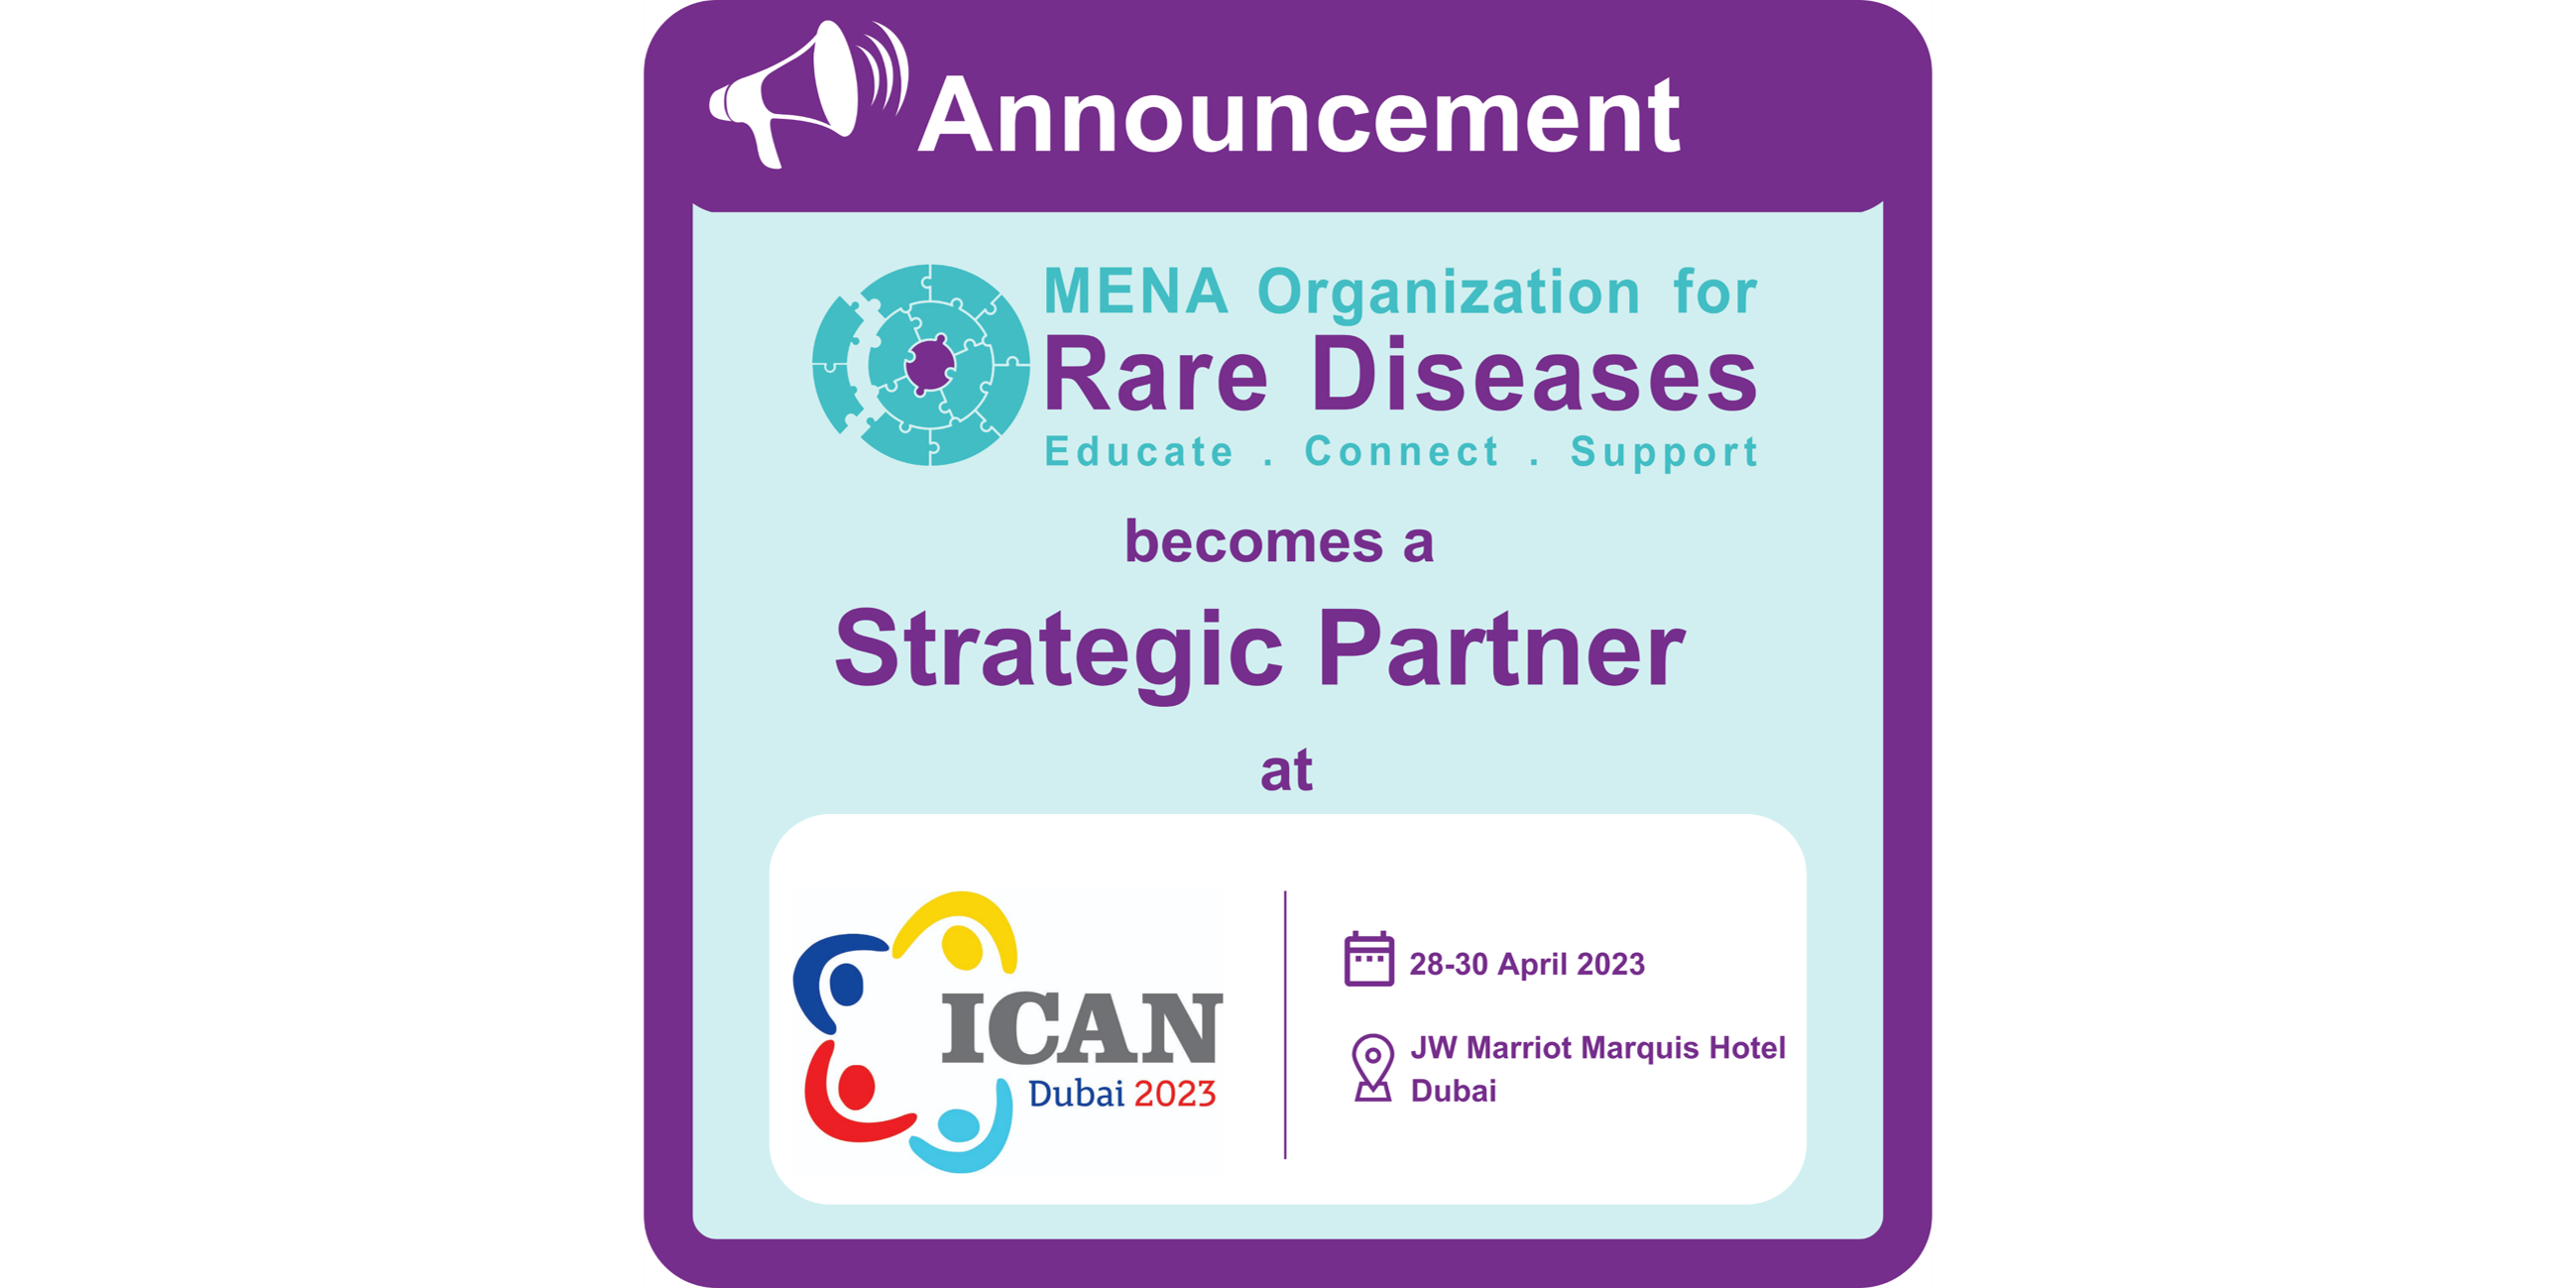 MENA Organization for Rare Diseases supports the ICAN Conference as a Strategic Partner